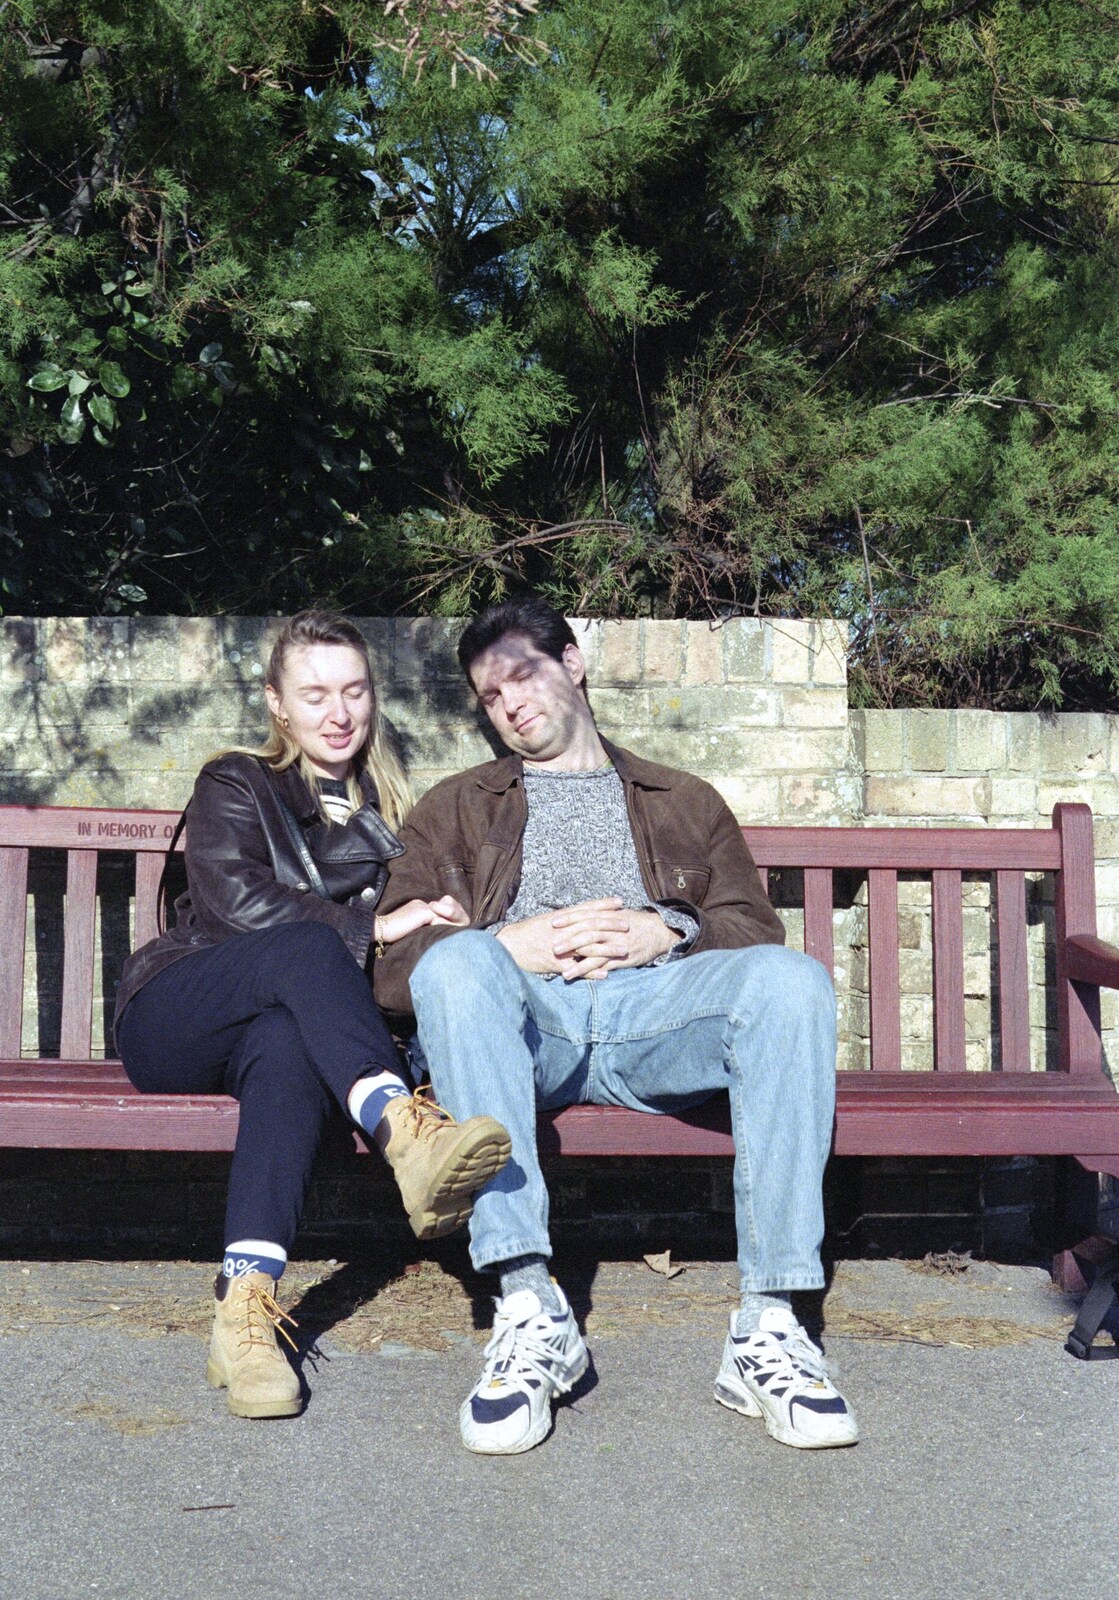 Riki's Wedding, Treboeth, Swansea - 7th May 1996: Carole and Sean take time out on a seaside bench